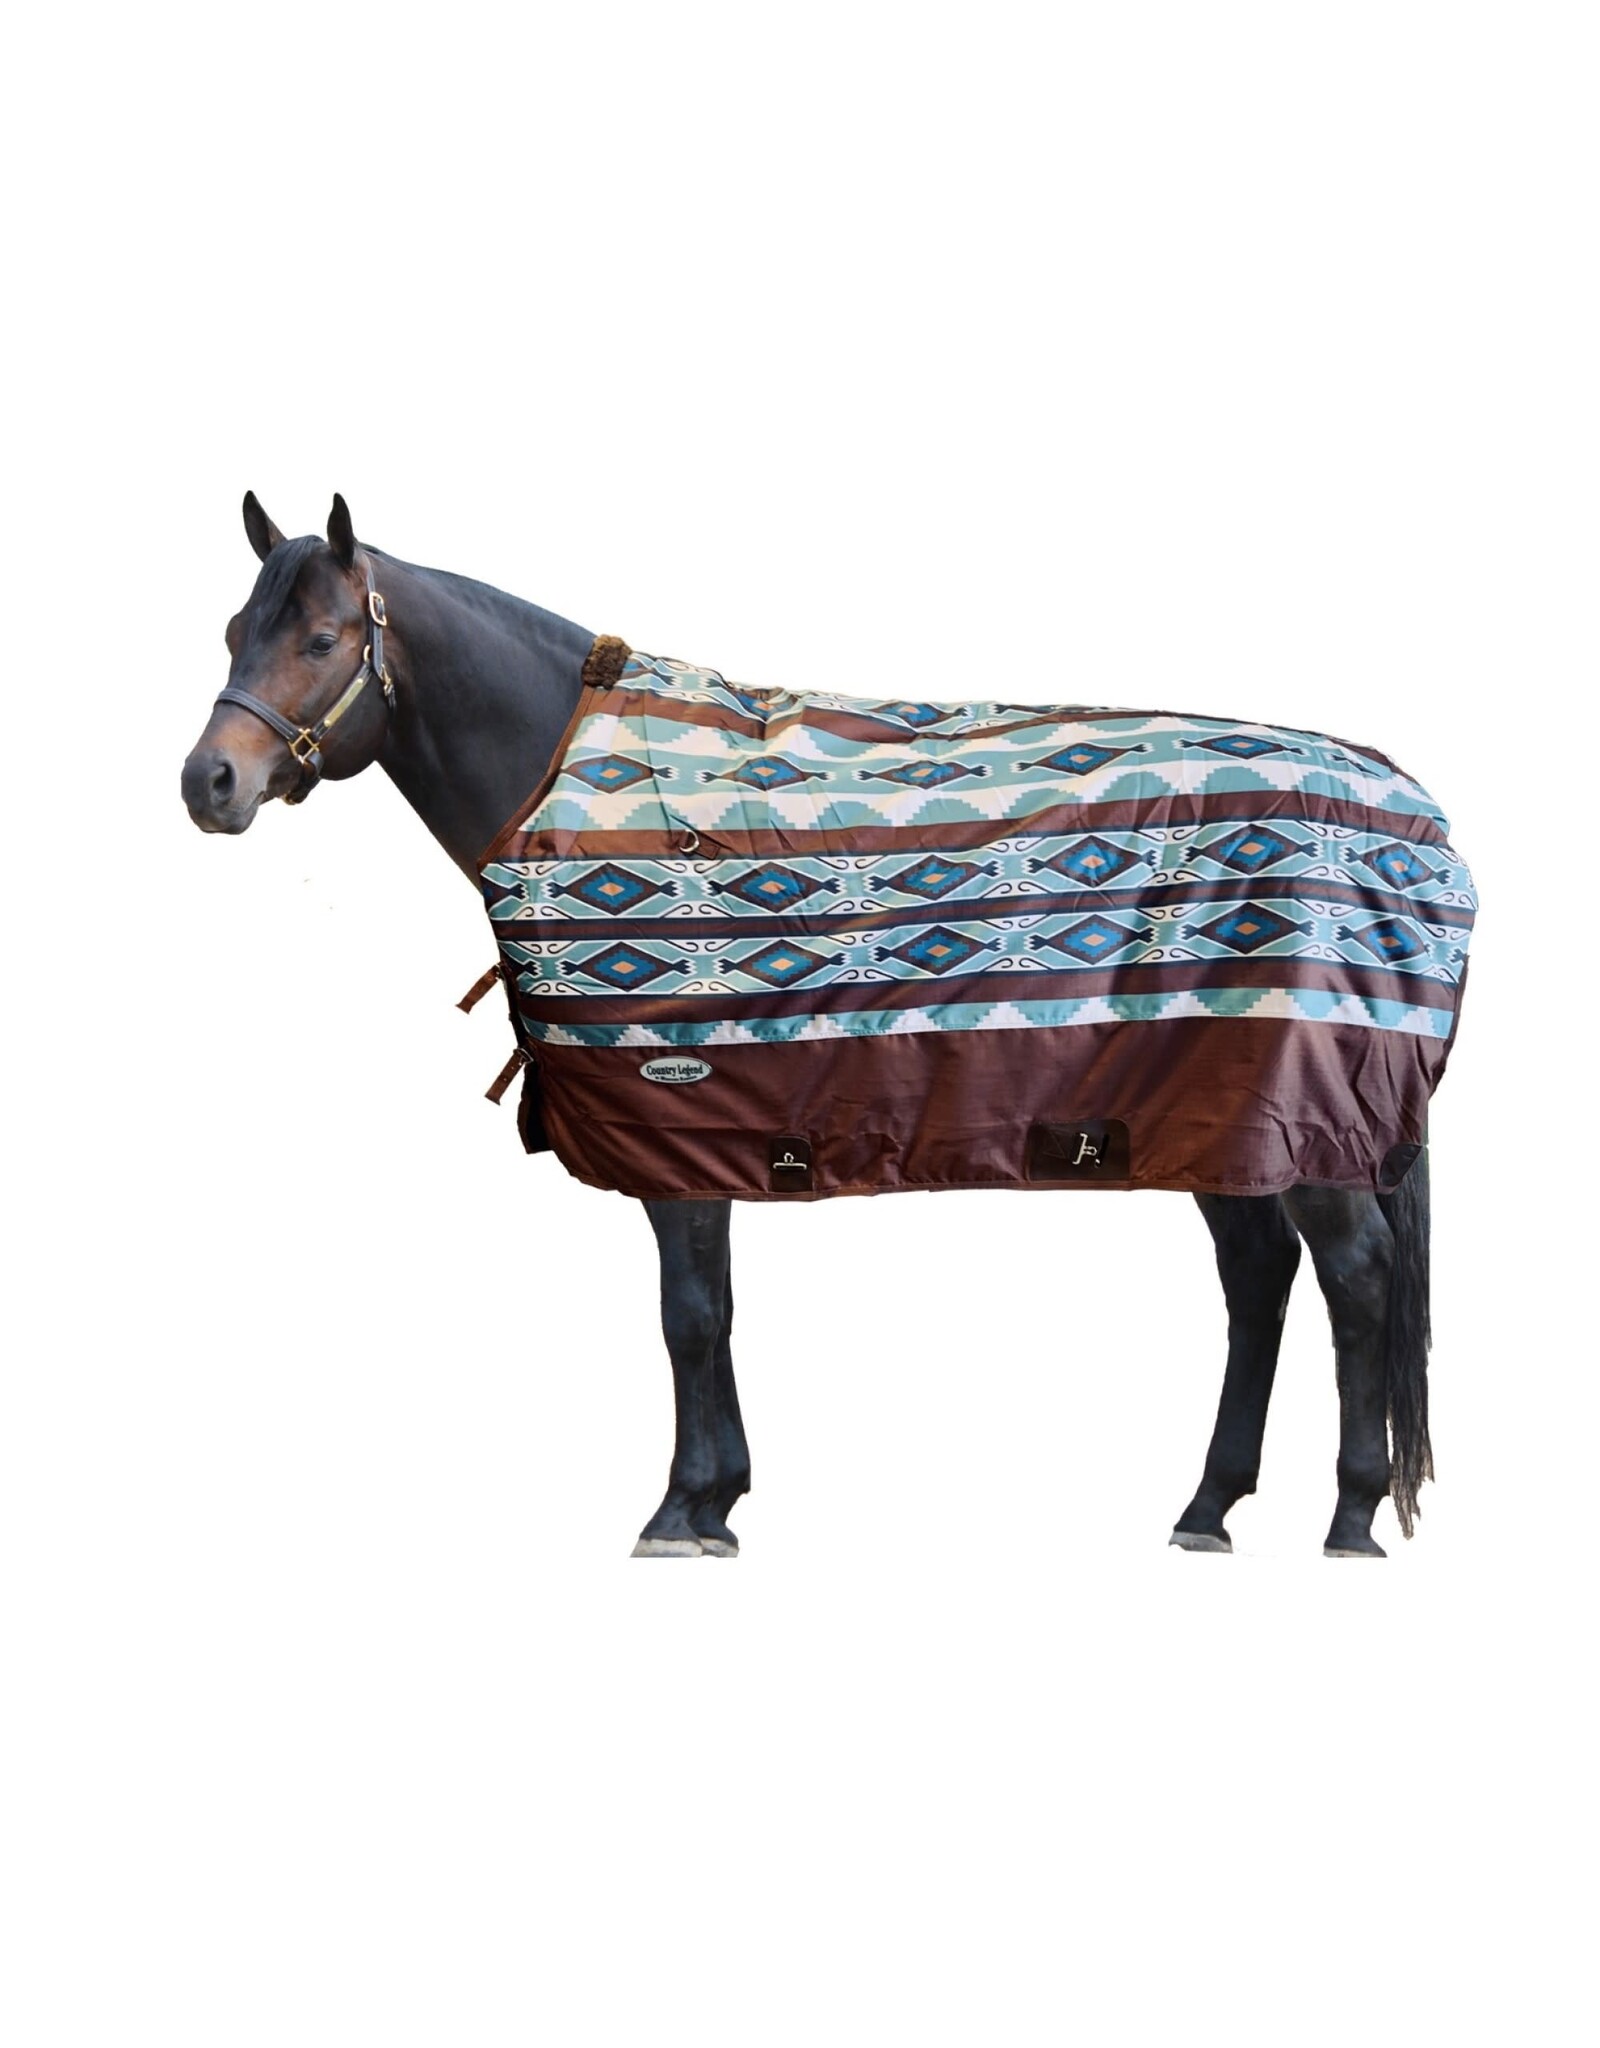 Blanket - Country Legend 1200D Winter Turnout 300g - Turq/Brown - 82 - 310001-19/82